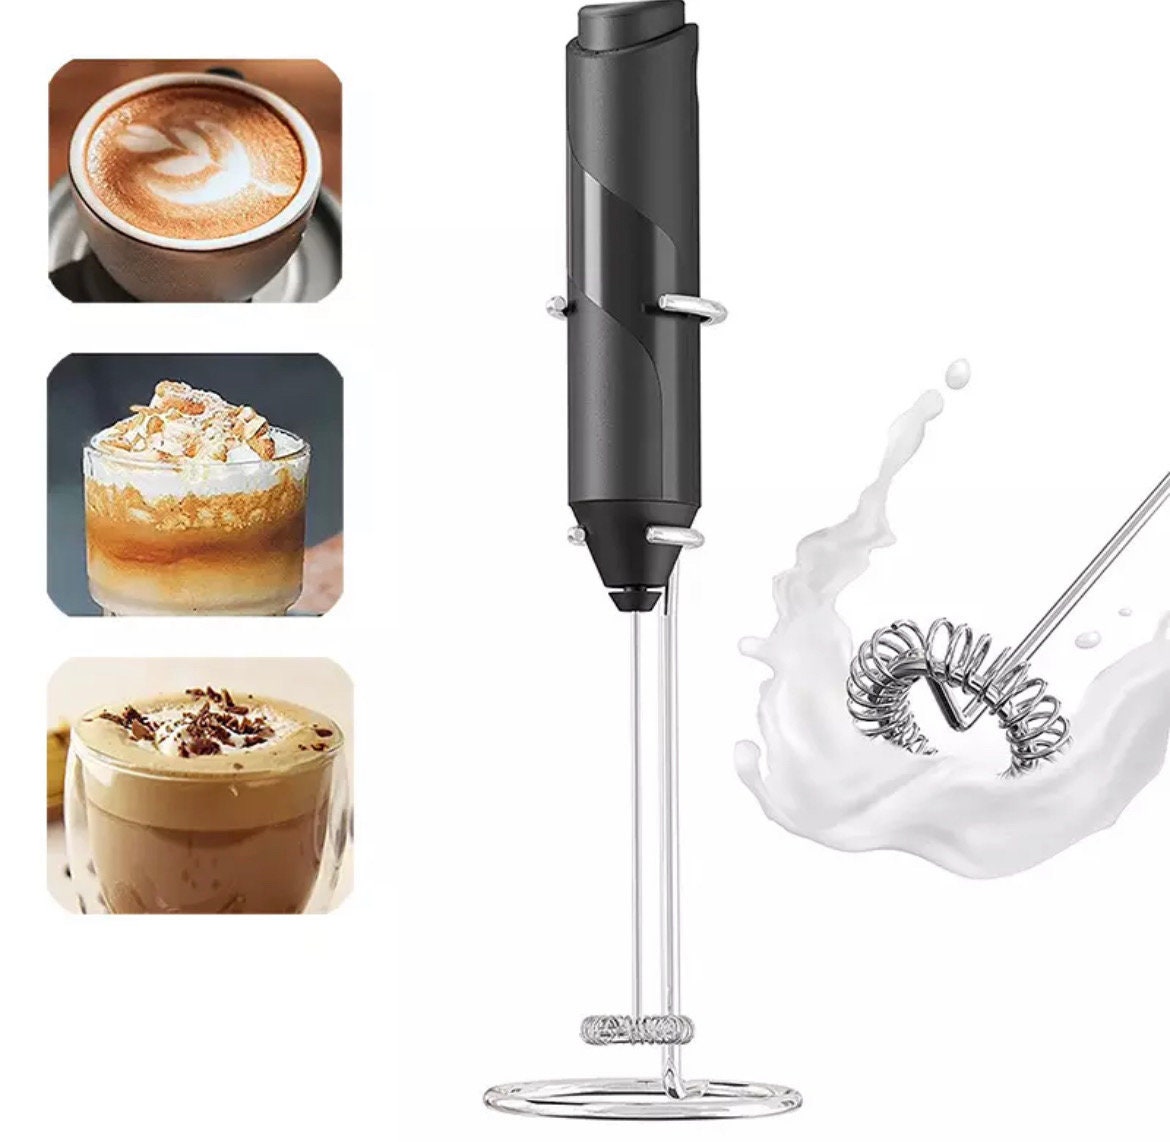 Elementi Milk Frother Wand - Electric Handheld Matcha Whisk - Coffee Hand  Frother & Frappe Maker - Coffee Mixer - Electric Coffee Drink Stirrer 